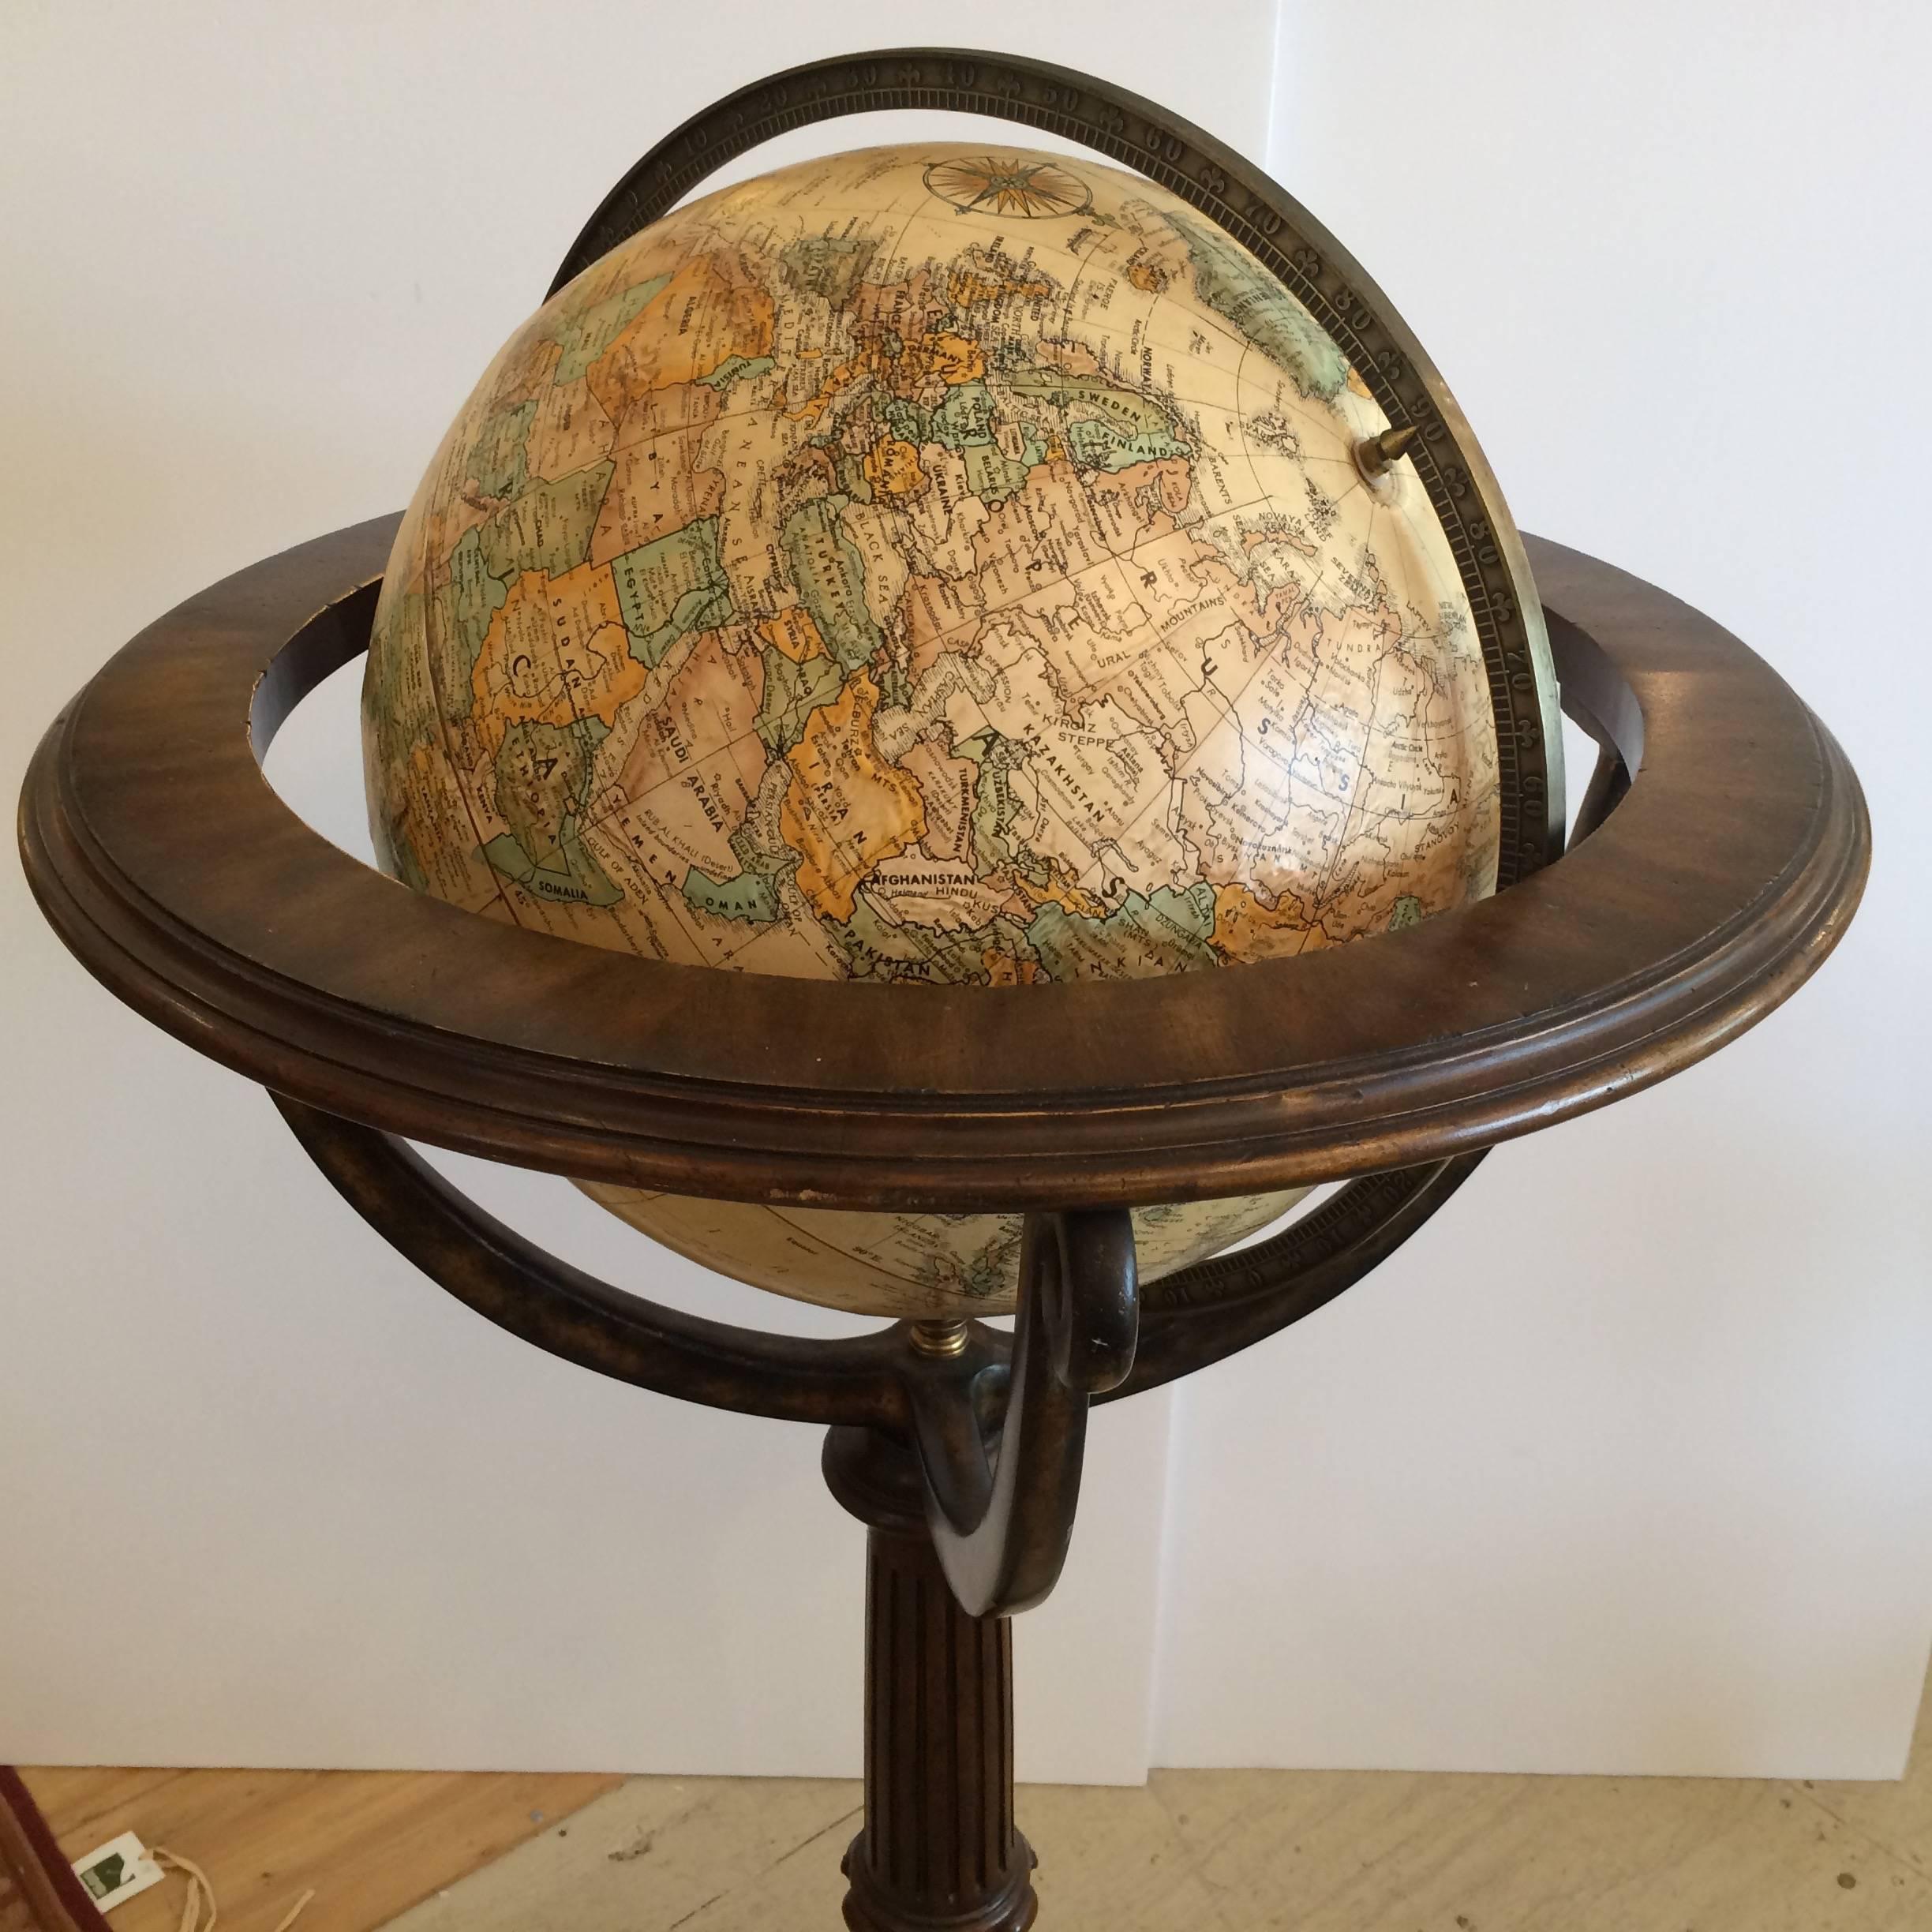 Beautifully made standing globe with rich carved wood three legged stand, having brass adornments and a warm golden aged globe that rotates.